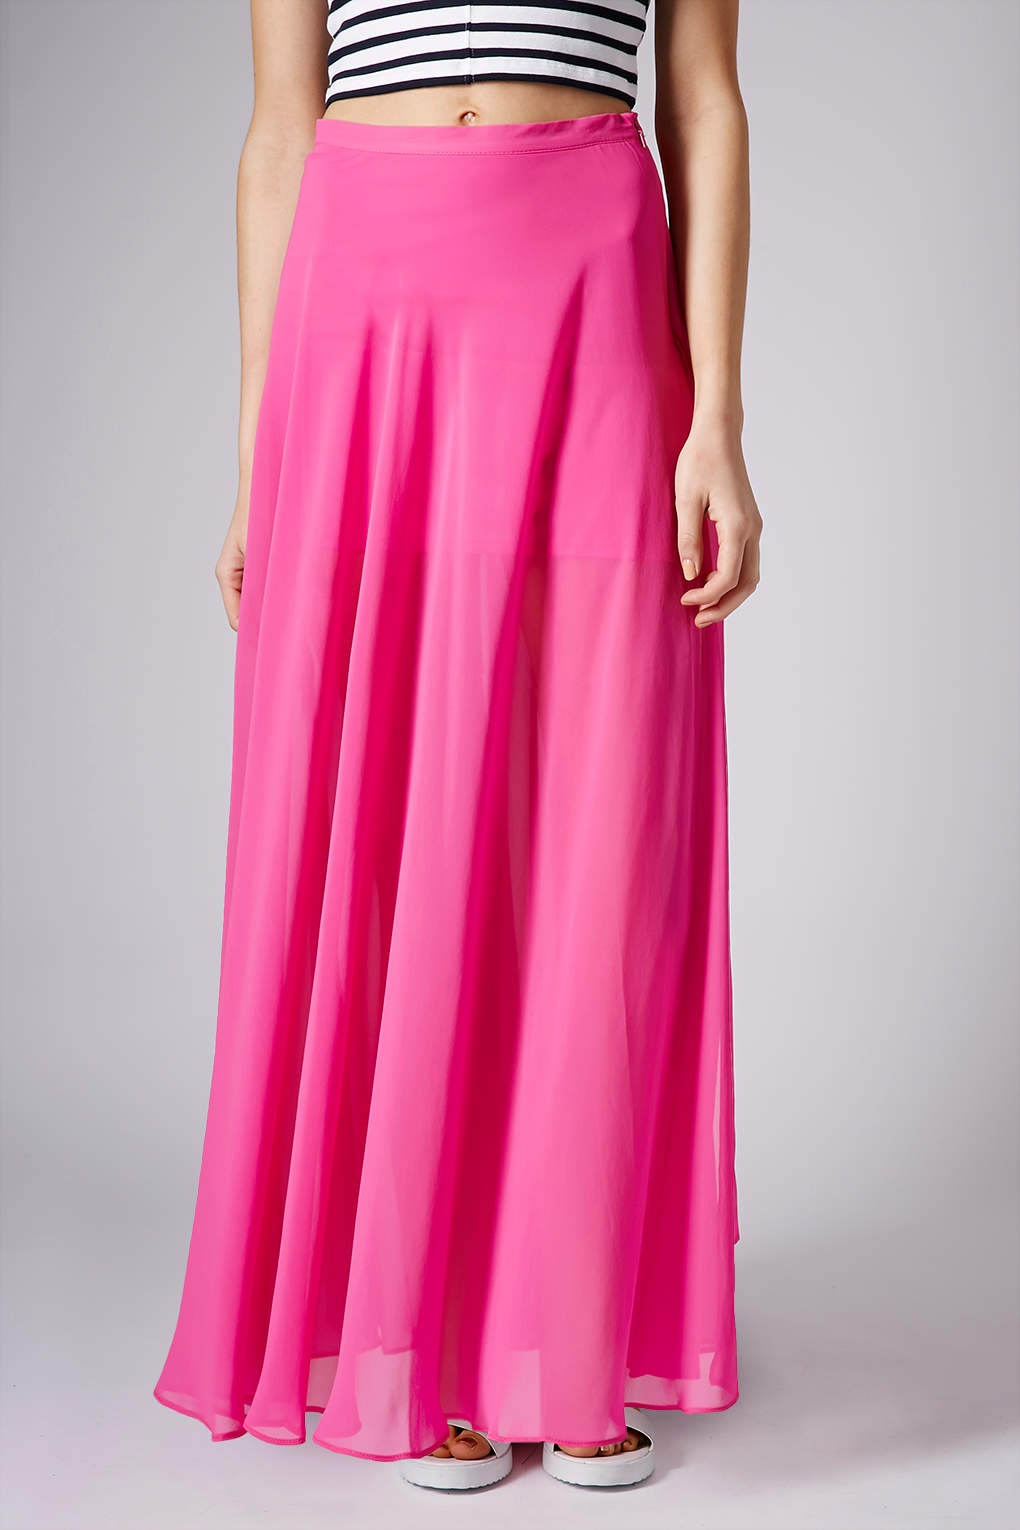 Topshop Pink Chiffon Maxi Skirt in Pink | Lyst